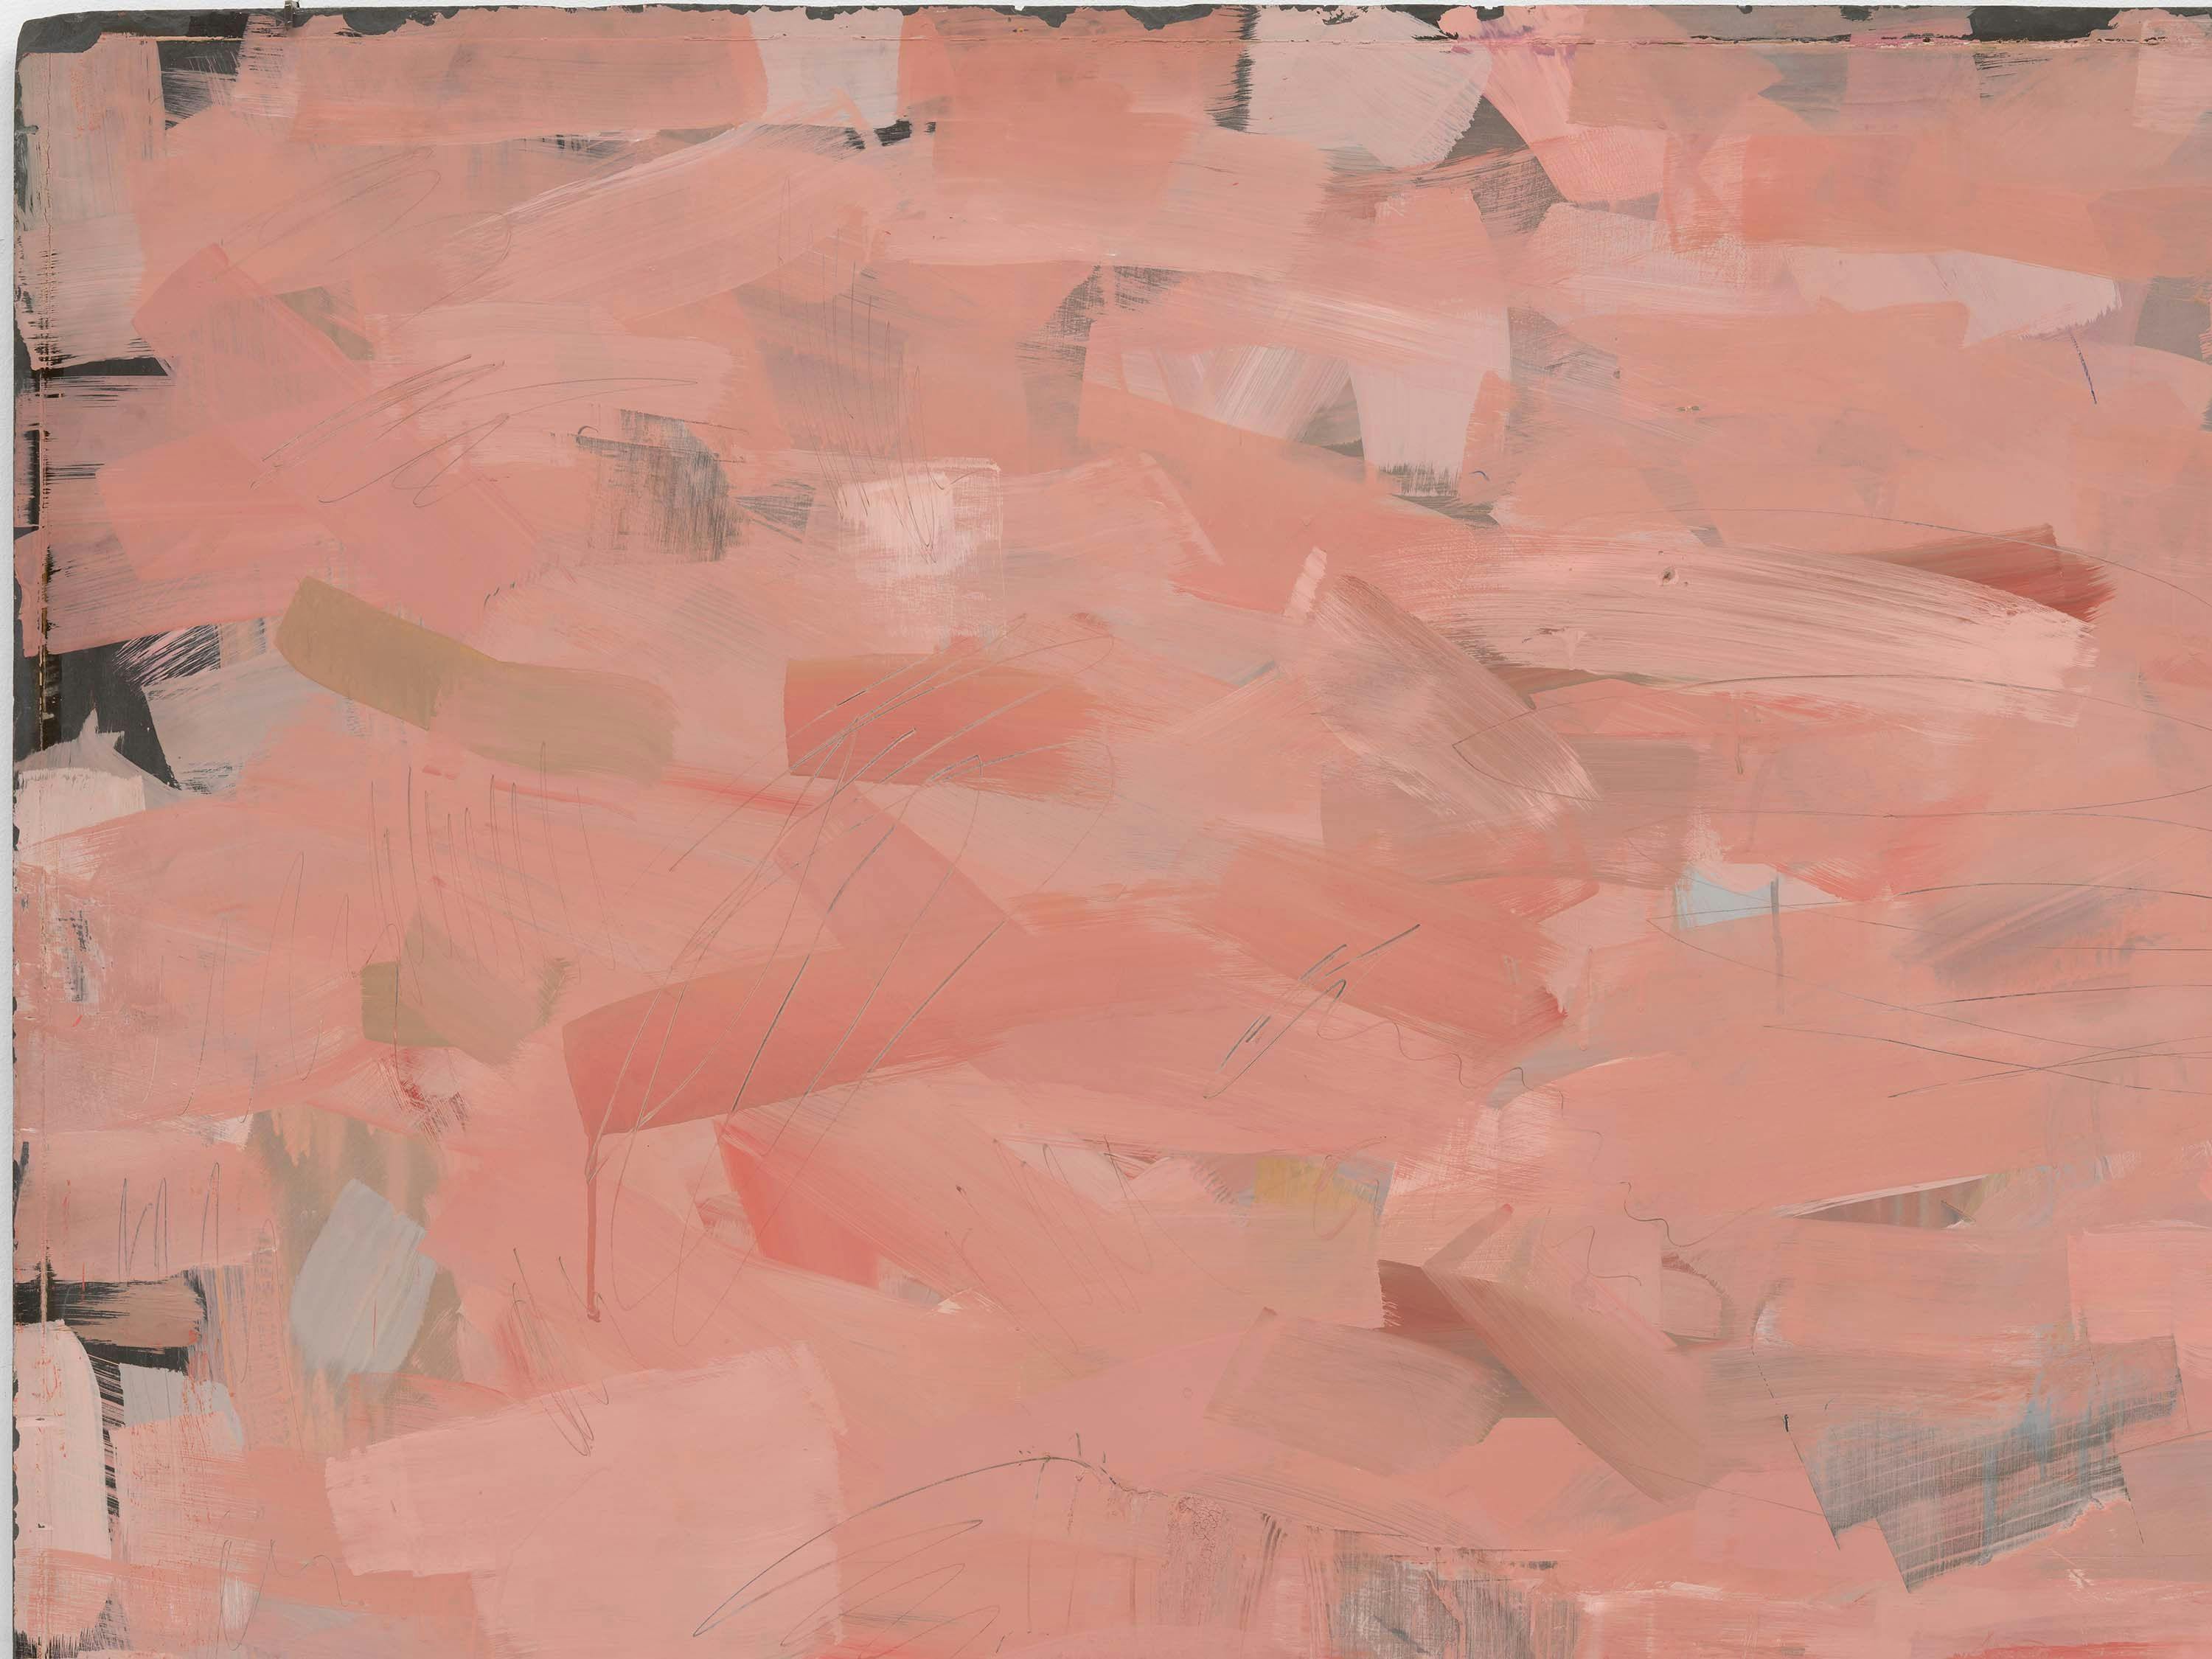 A detail from a painting by Merrill Wagner, titled Composition #3, dated 1983.